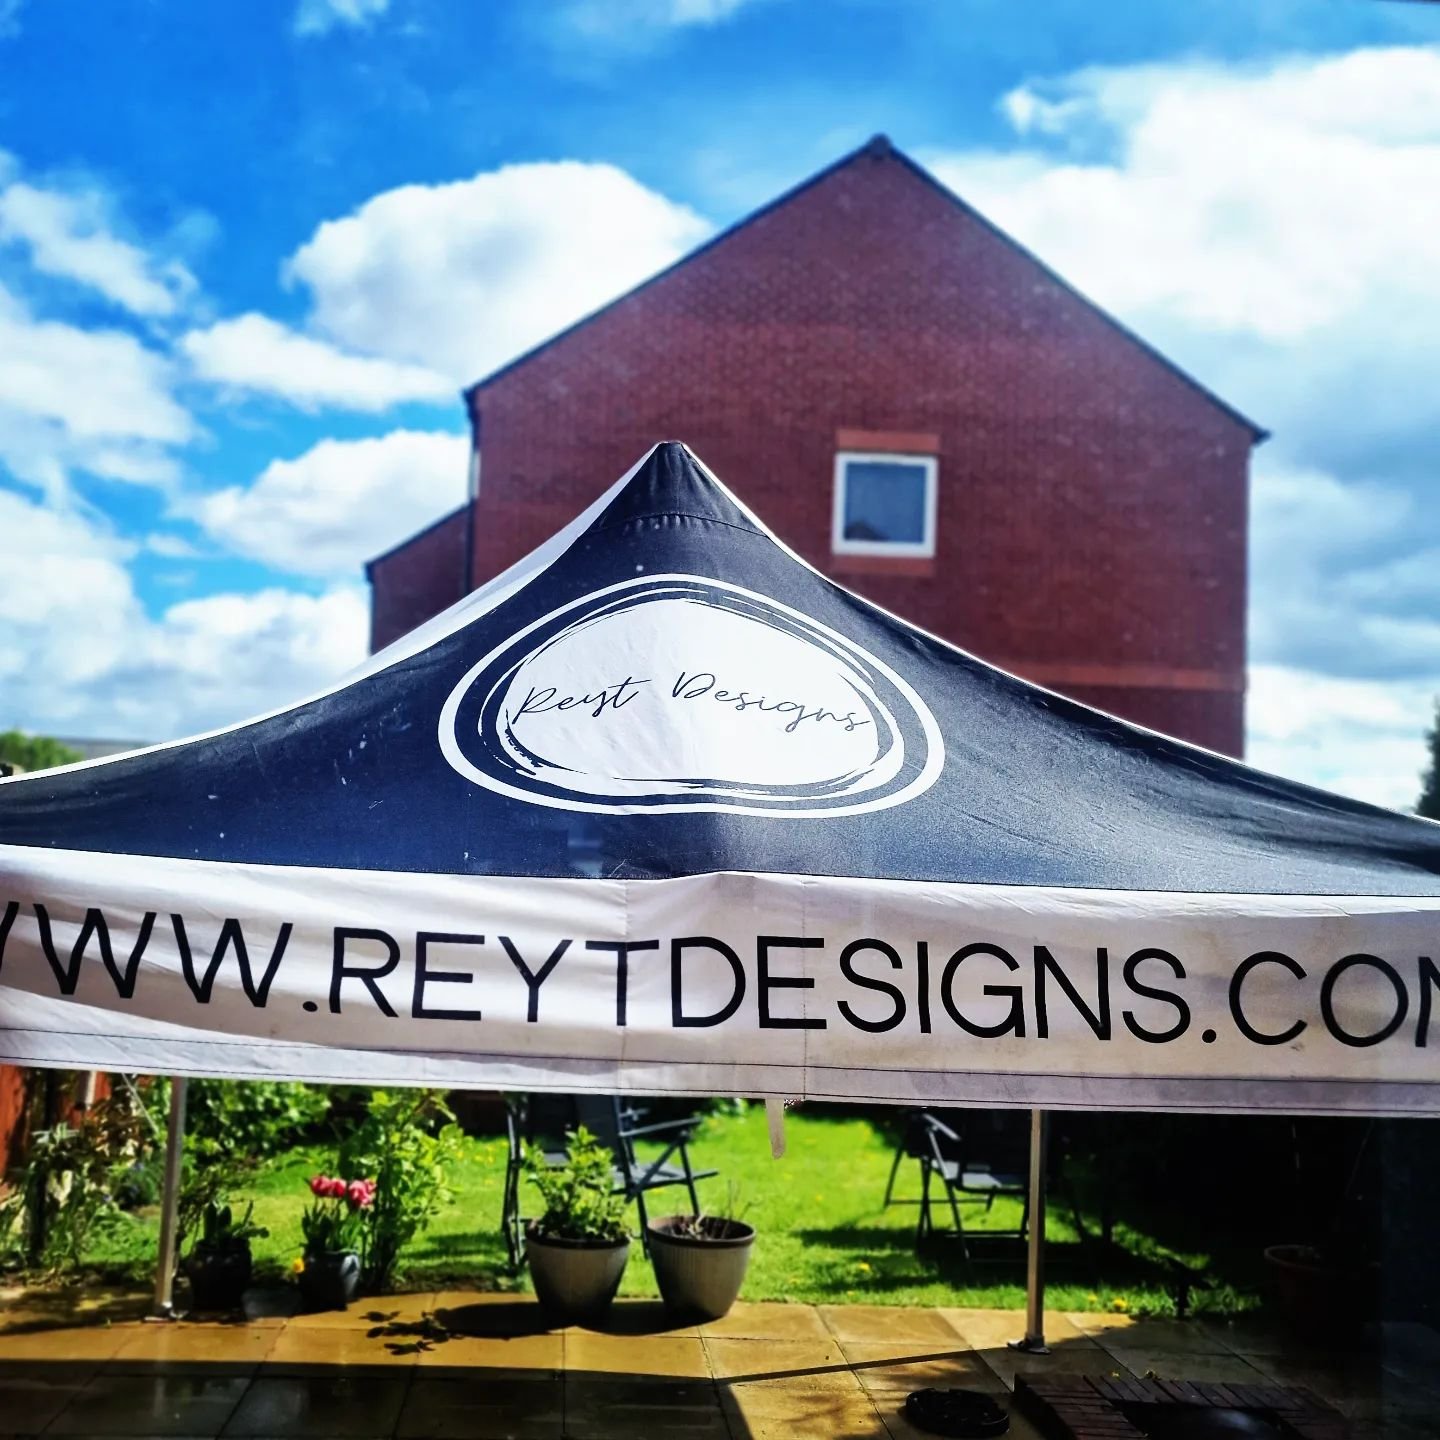 New day, new week, new beginning...
A rubbish market has its positives: No need to make more stock 🤣🤣🤣

So I decided to make my gazebo look like new 😉🤍🖤

I've made the most of the sunny morning and pressure washed my canopy. The sides are going